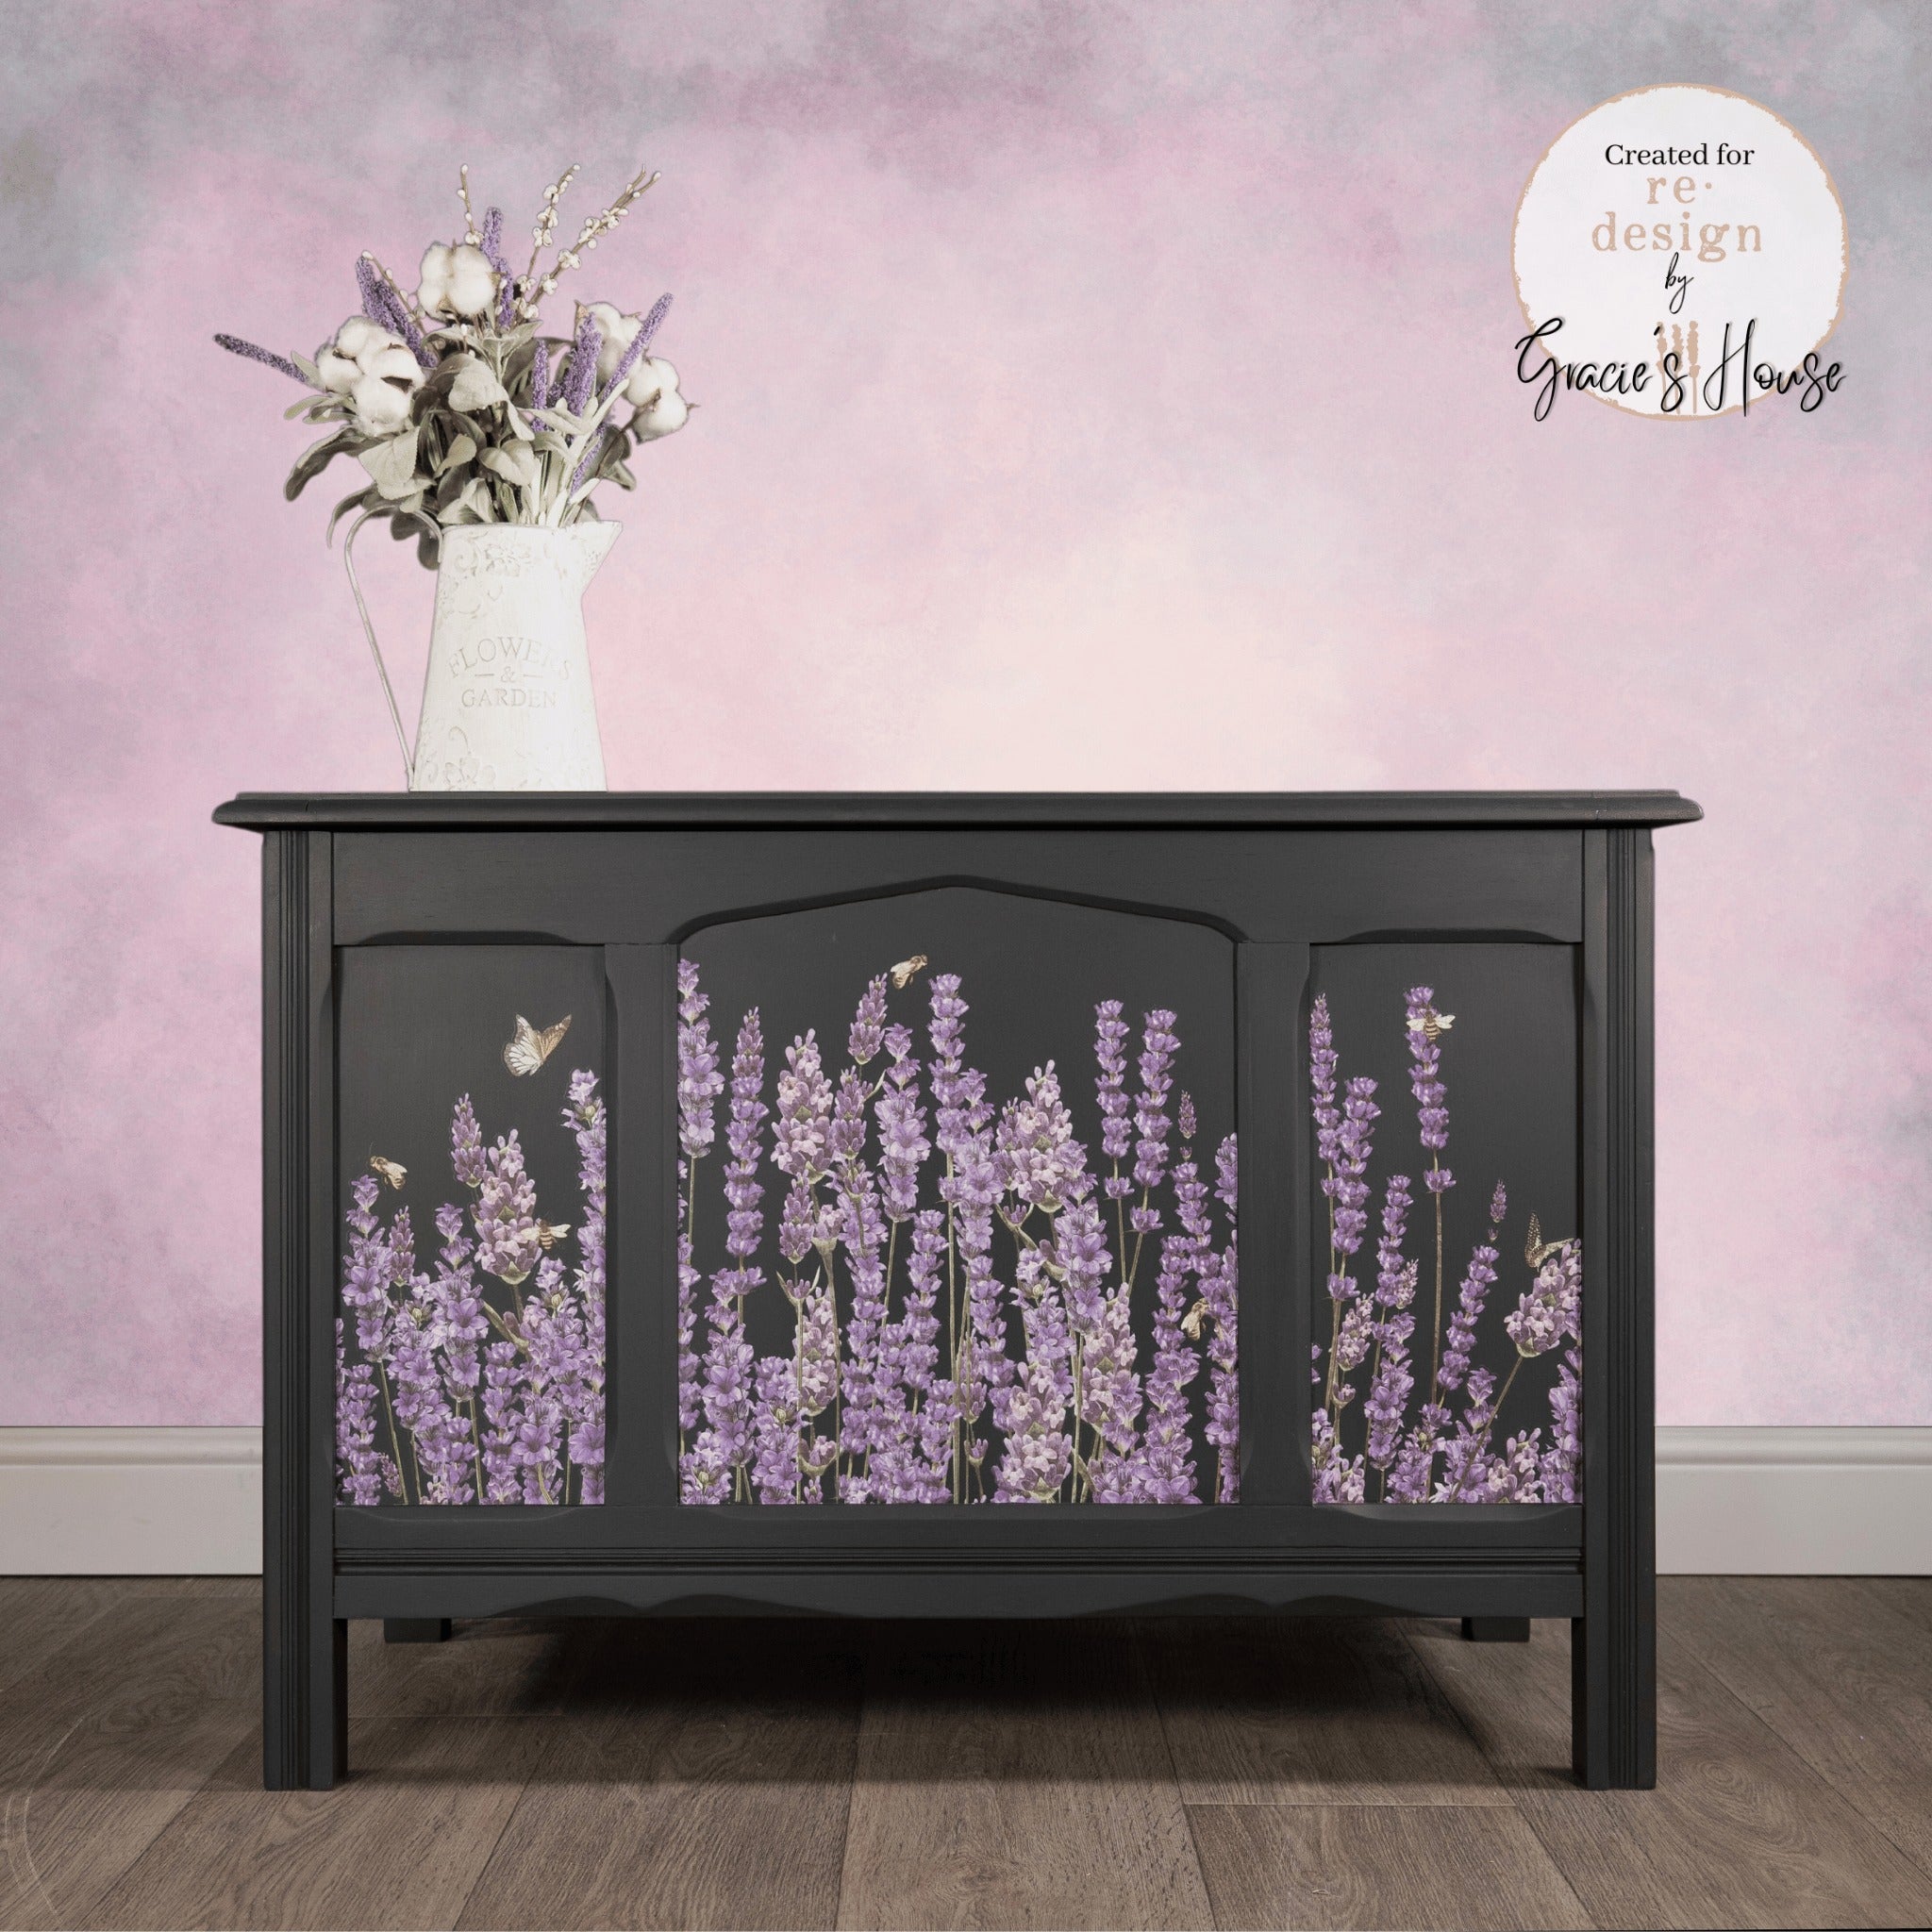 A vintage console table refurbished by Gracie's House is painted flat black and features ReDesign with Prima's Champs de Lavende transfer on the front.